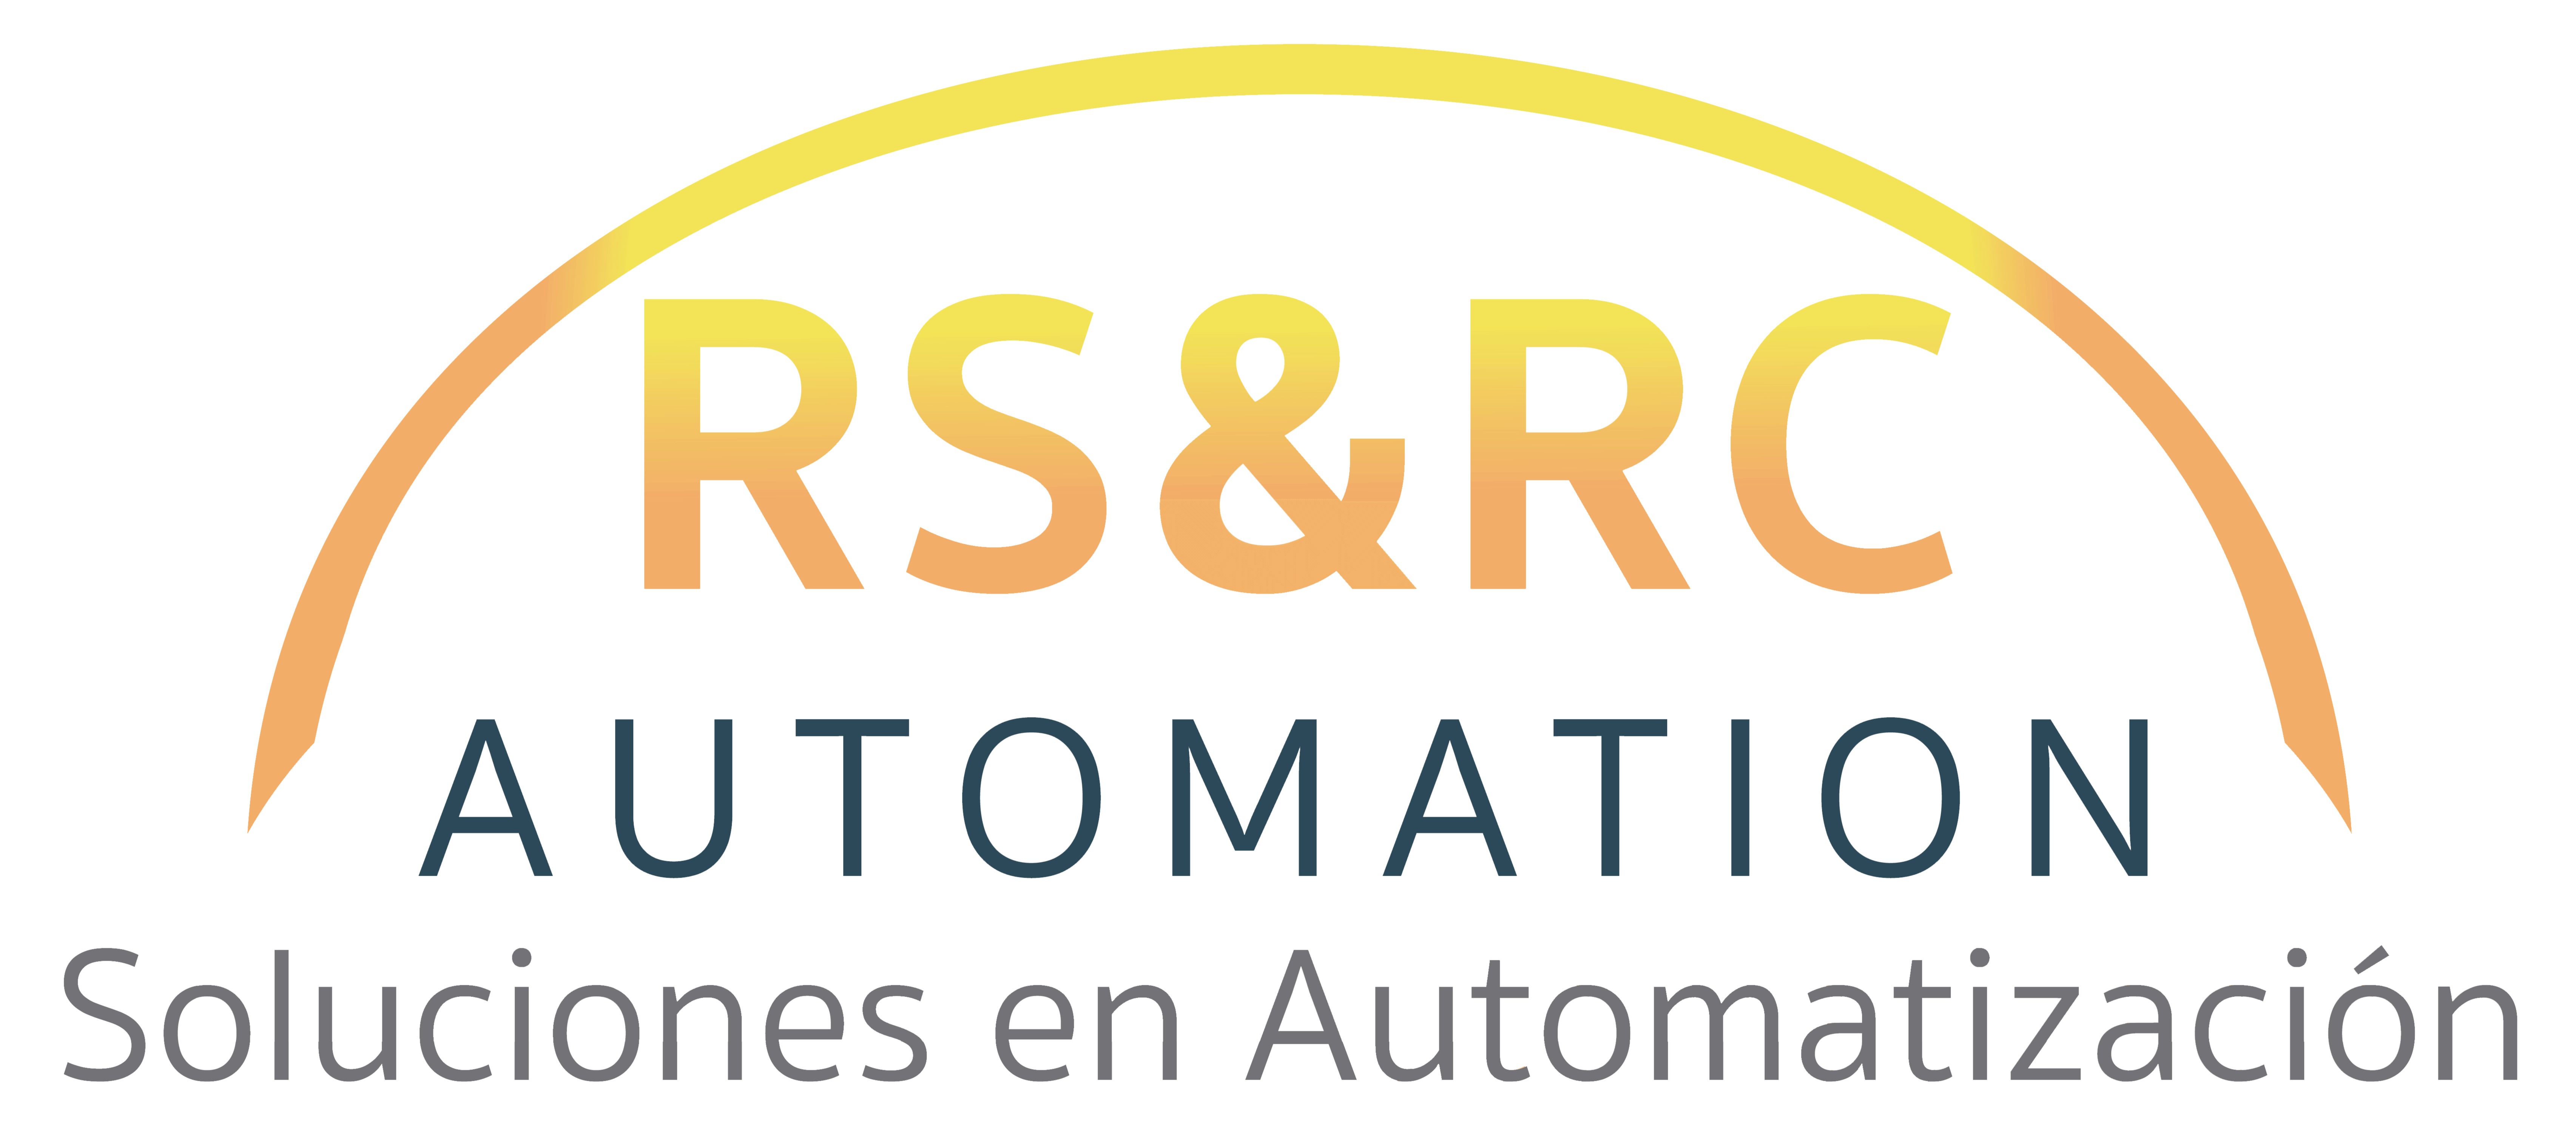 RS&RC AUTOMATION LOGO